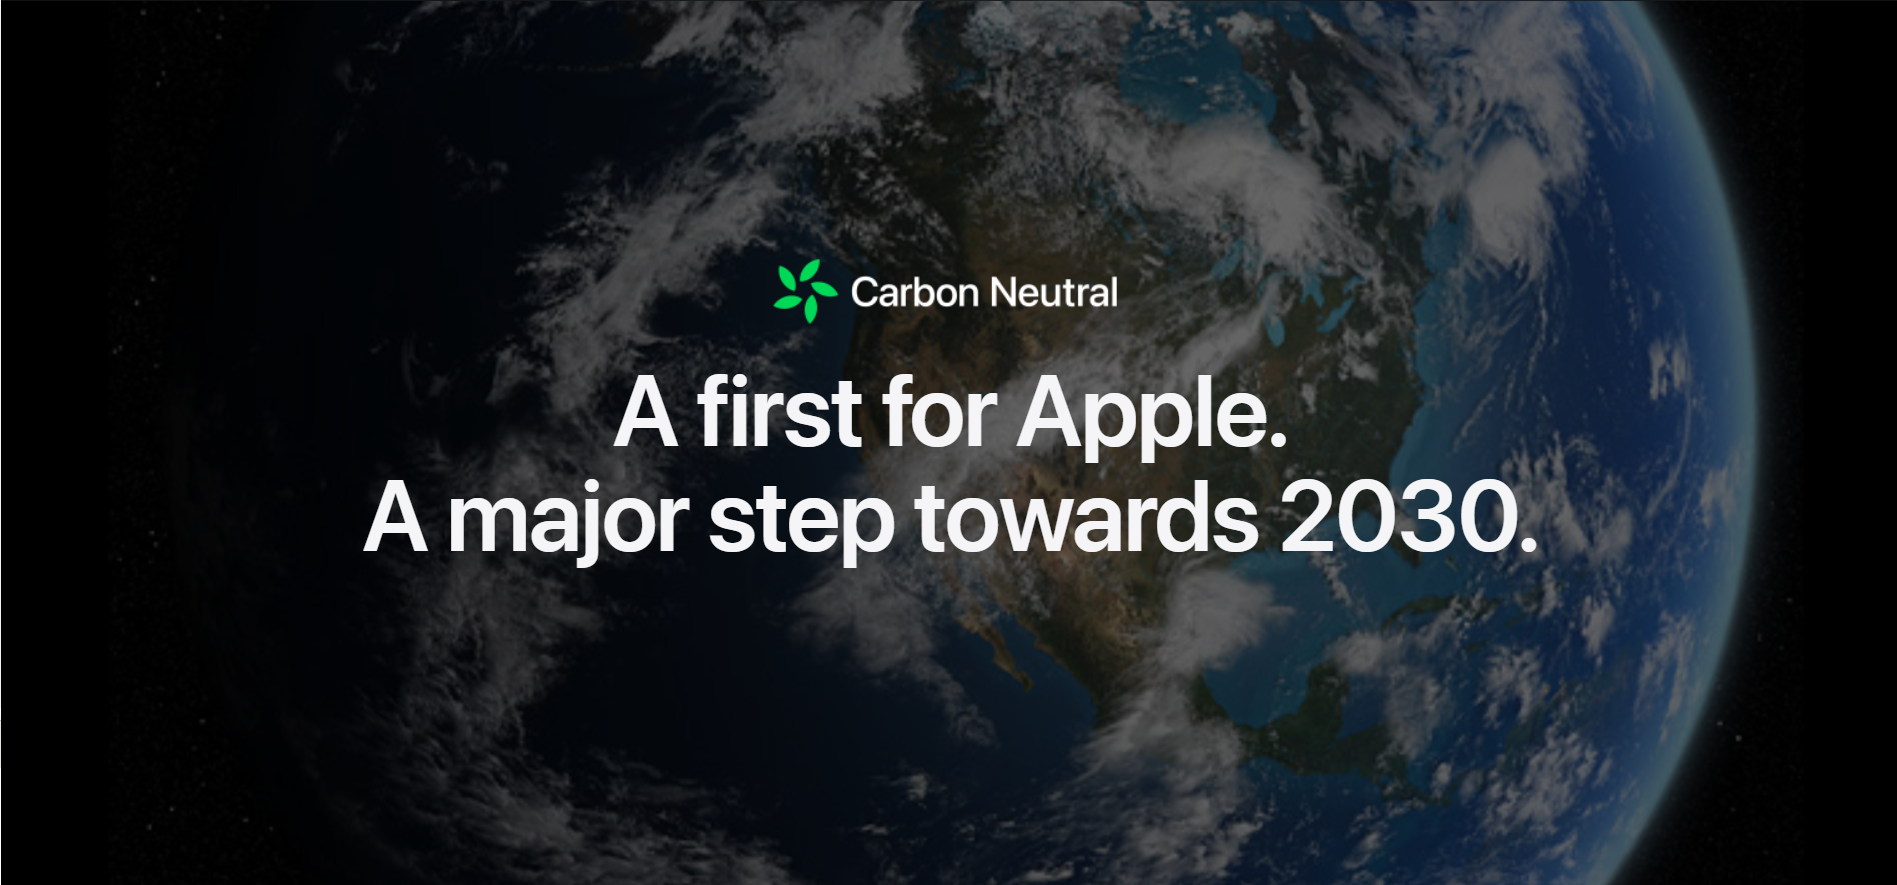 apple as a company that has gained eco friendly branding